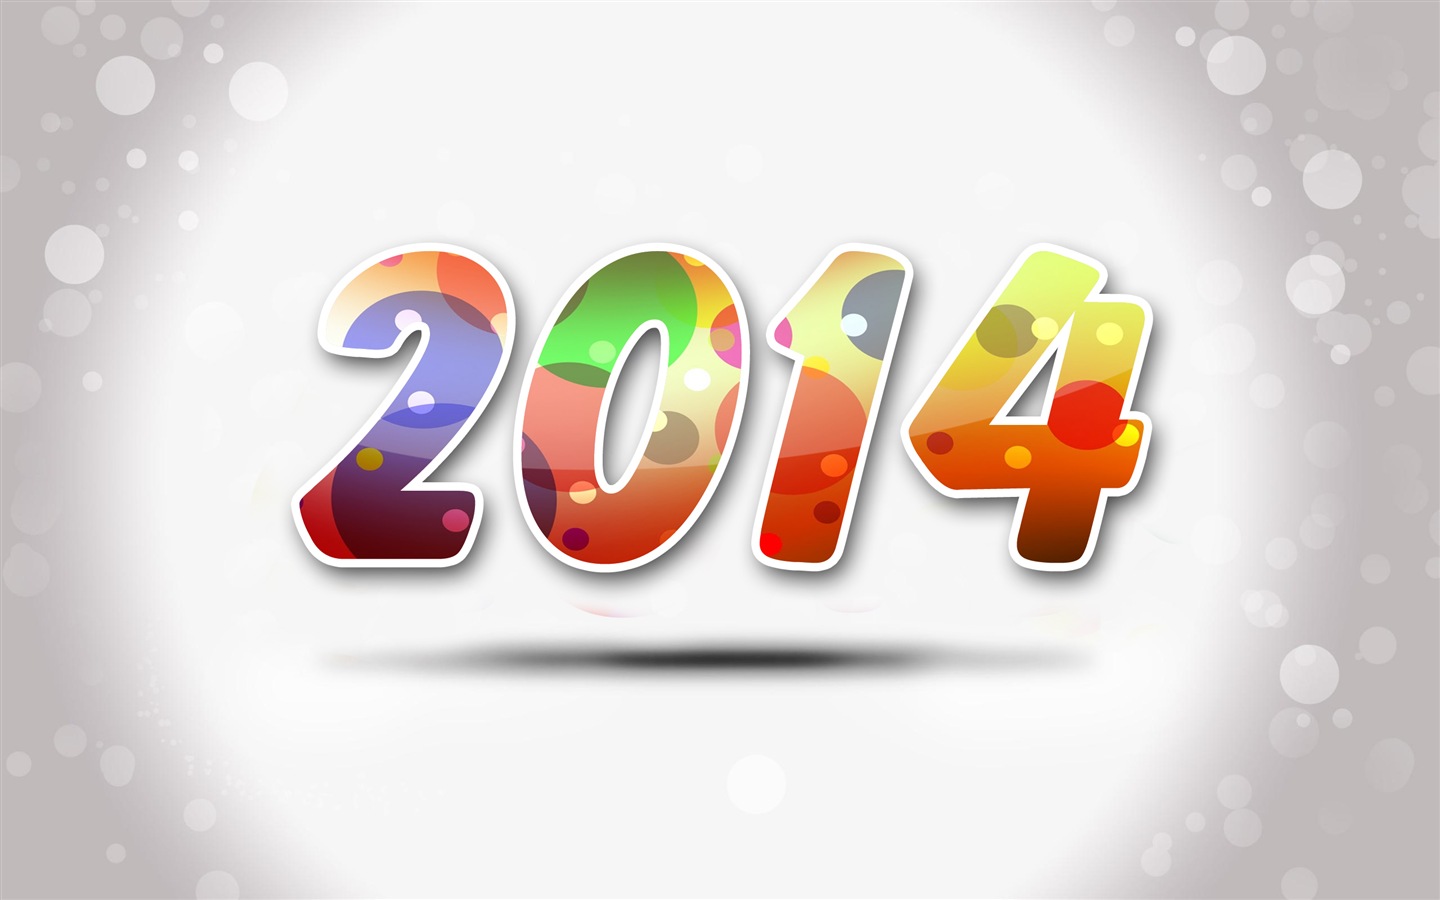 2014 New Year Theme HD Wallpapers (2) #17 - 1440x900